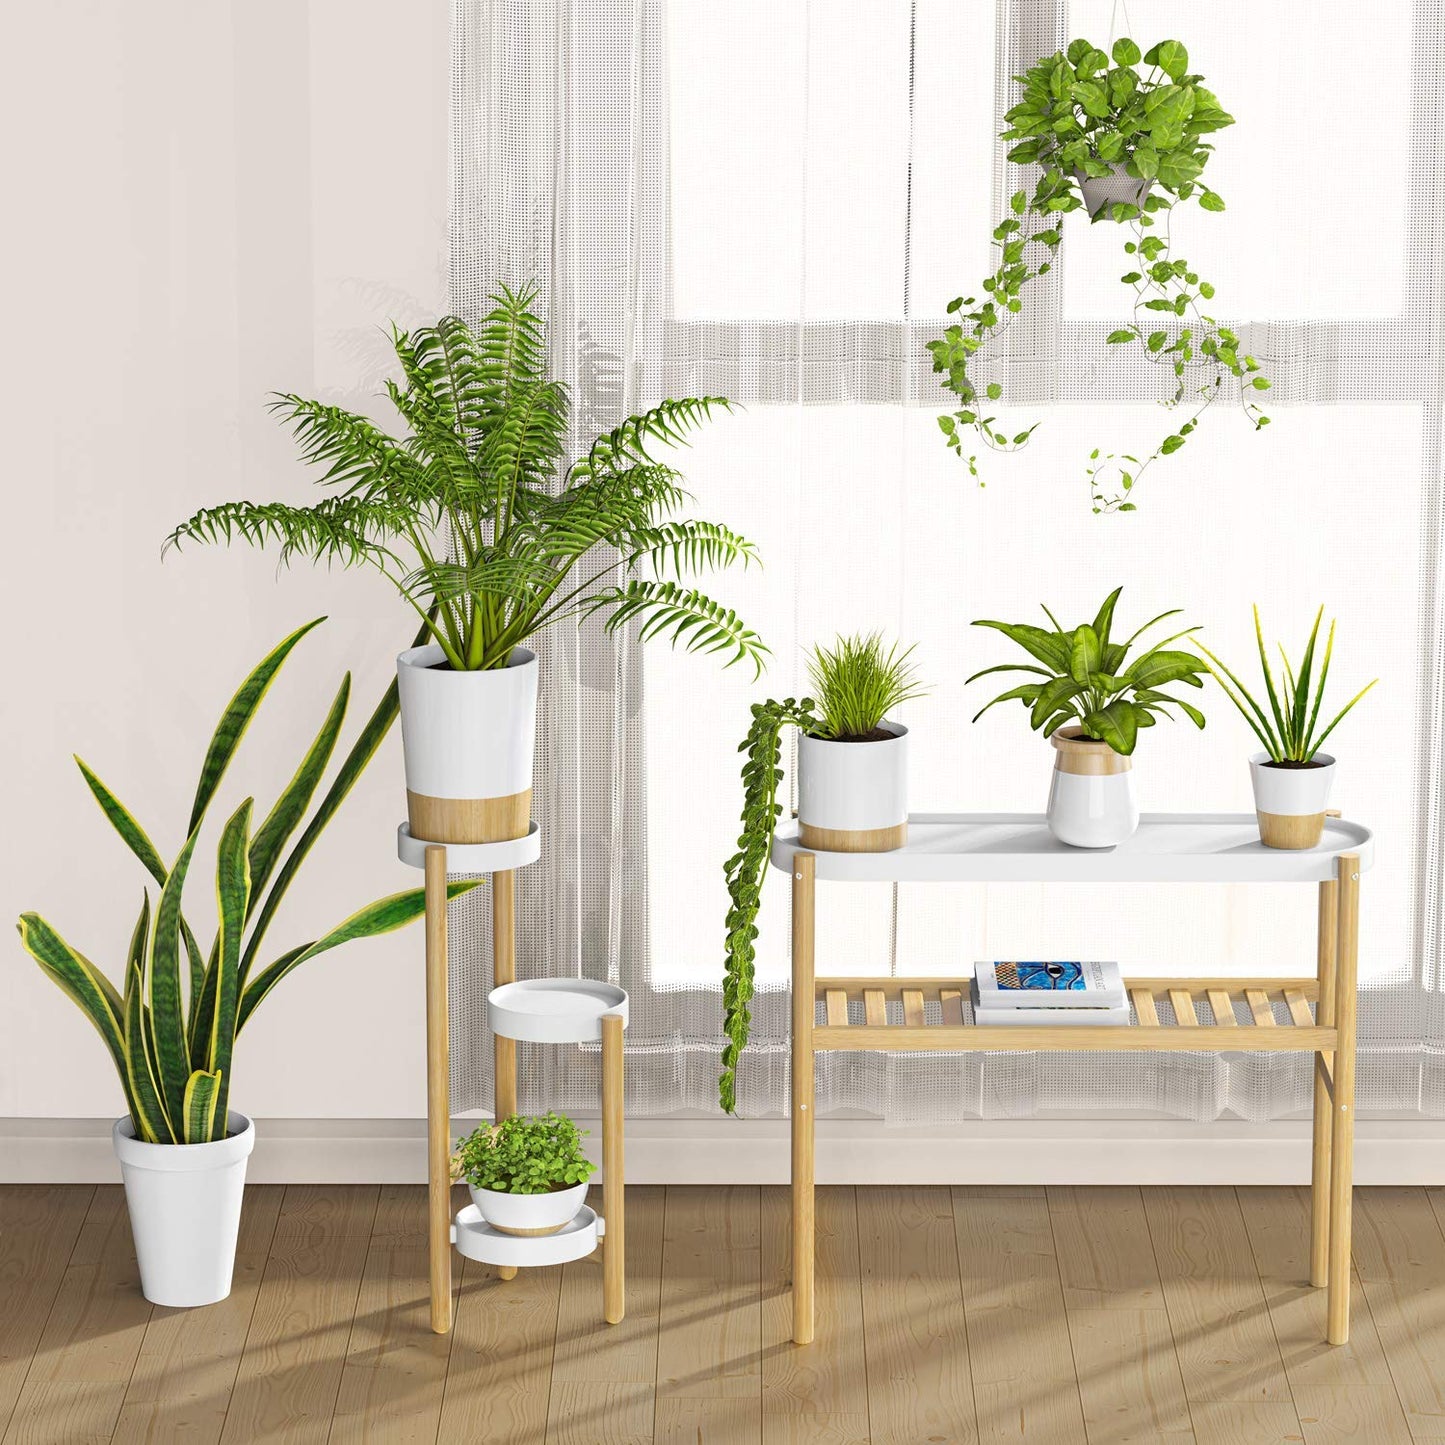 Casa De Amor Bamboo Plant Shelf Indoor, 2 Tier Tall Plant Stand Table for Multiple Plants, Window Table for Plants (2 Tier Shelf)